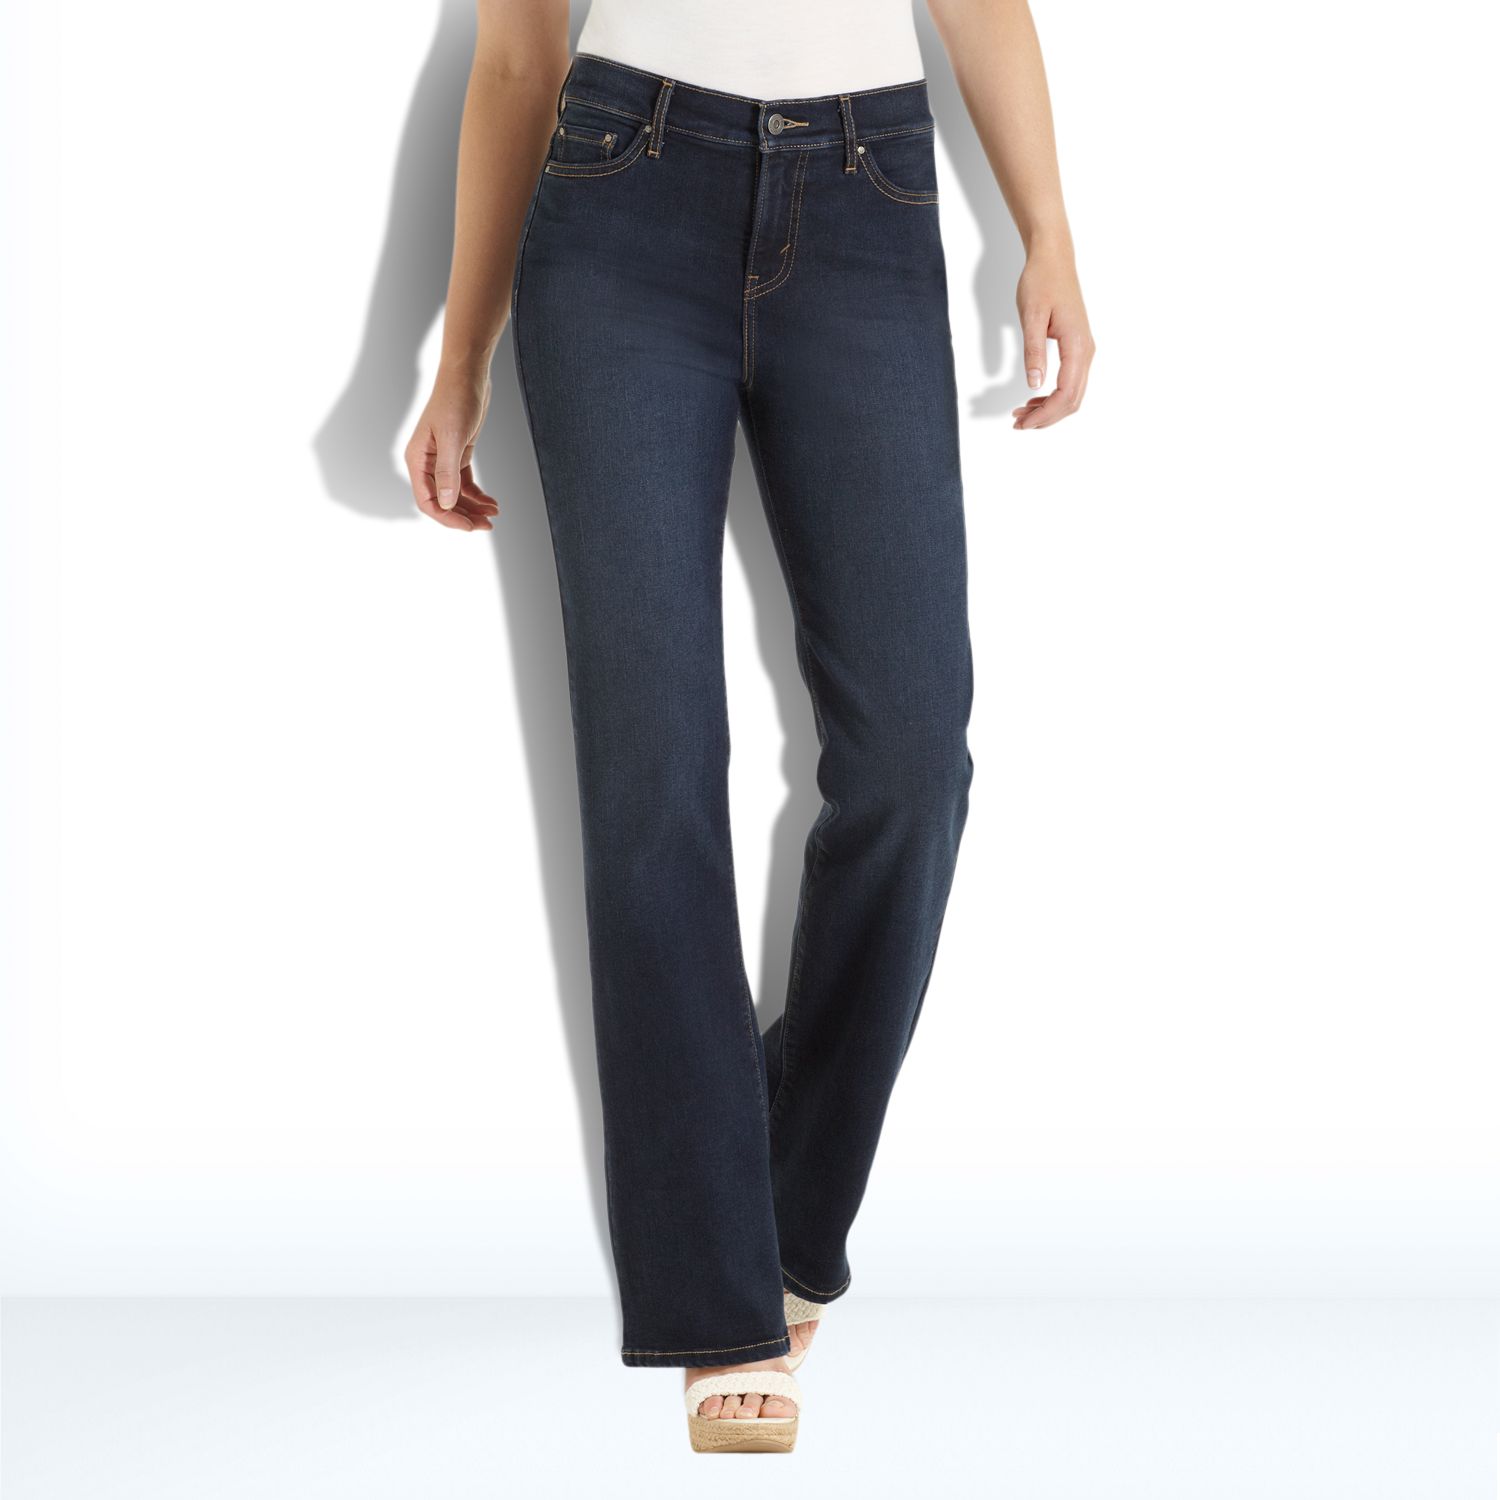 levi's 512 perfectly slimming jeans